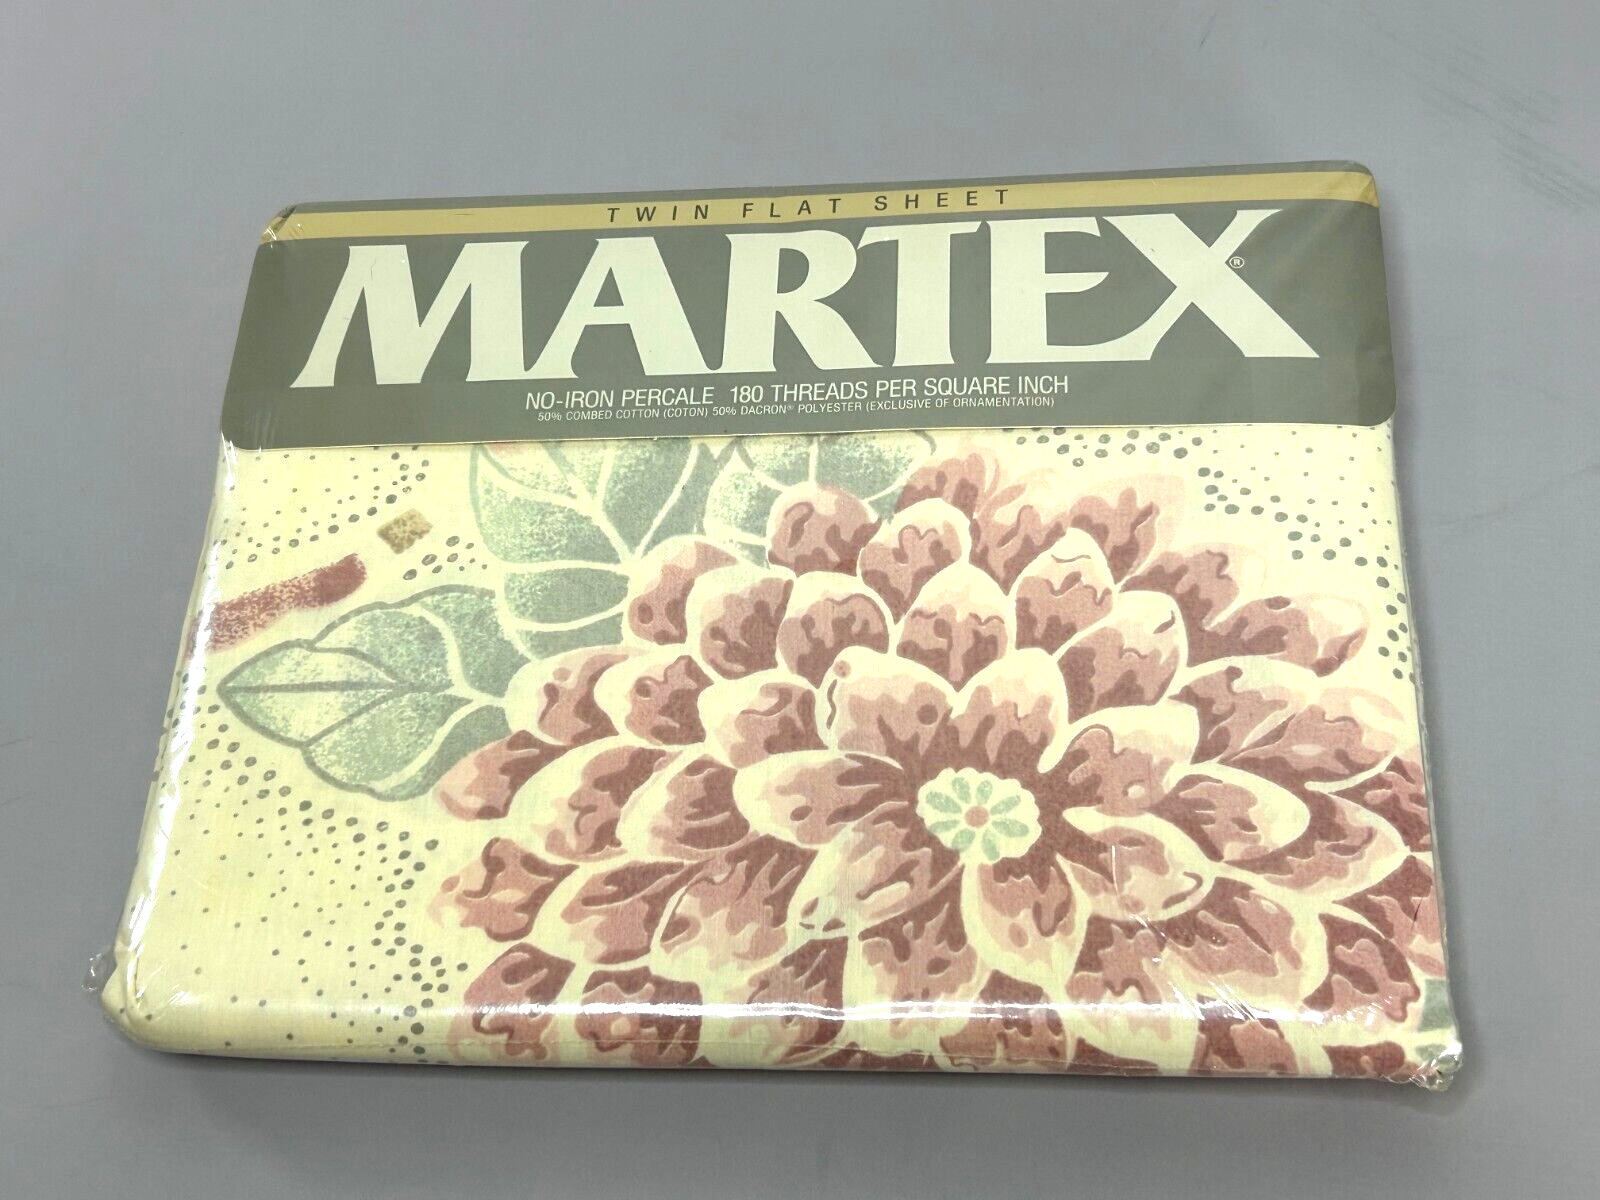 Vintage Martex Twin Flat Sheet East Wind No Iron Percale Floral 90's Farmhouse